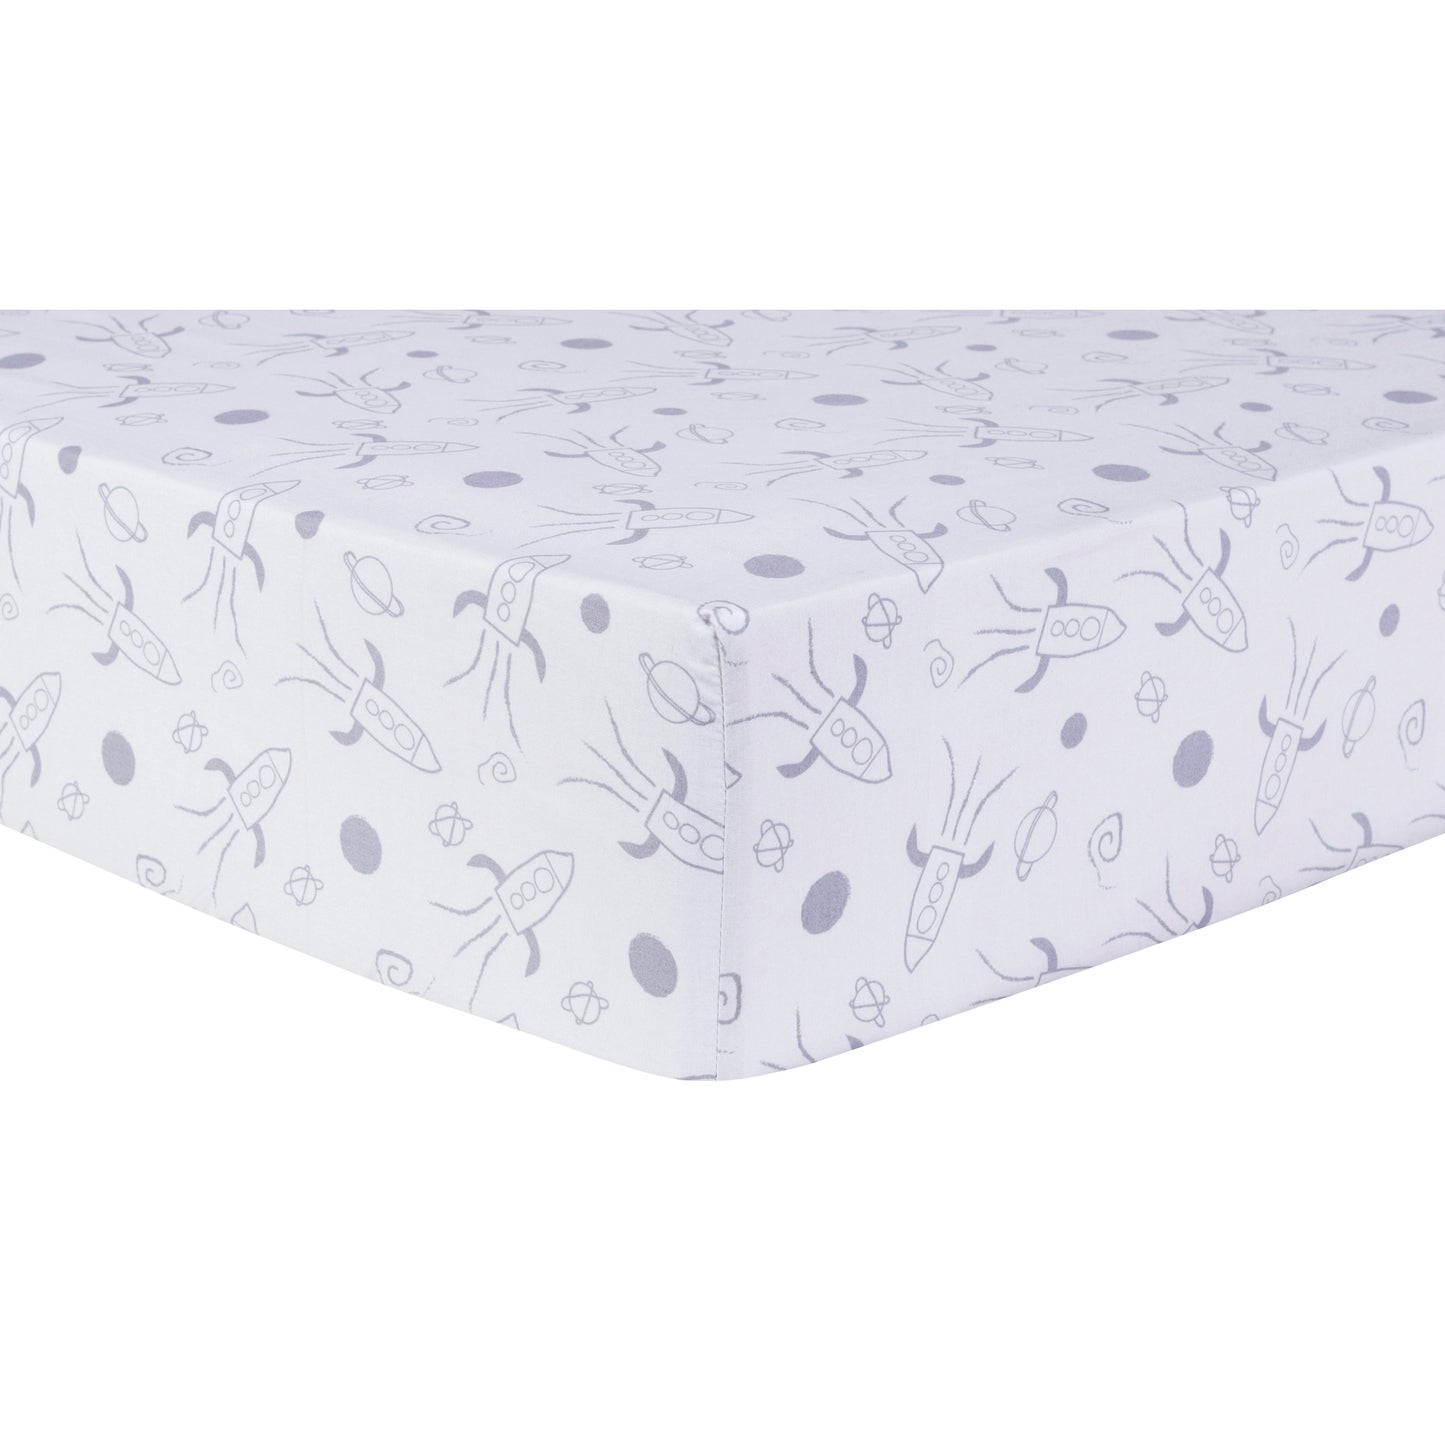 Fitted Crib Sheet is 100% cotton and features rocket ships scatter print in gray. Crib sheet fits a standard 28 in x 52 in crib mattress and features 8 inch deep pockets with elastic surrounding the entire opening ensuring a more secure fit.